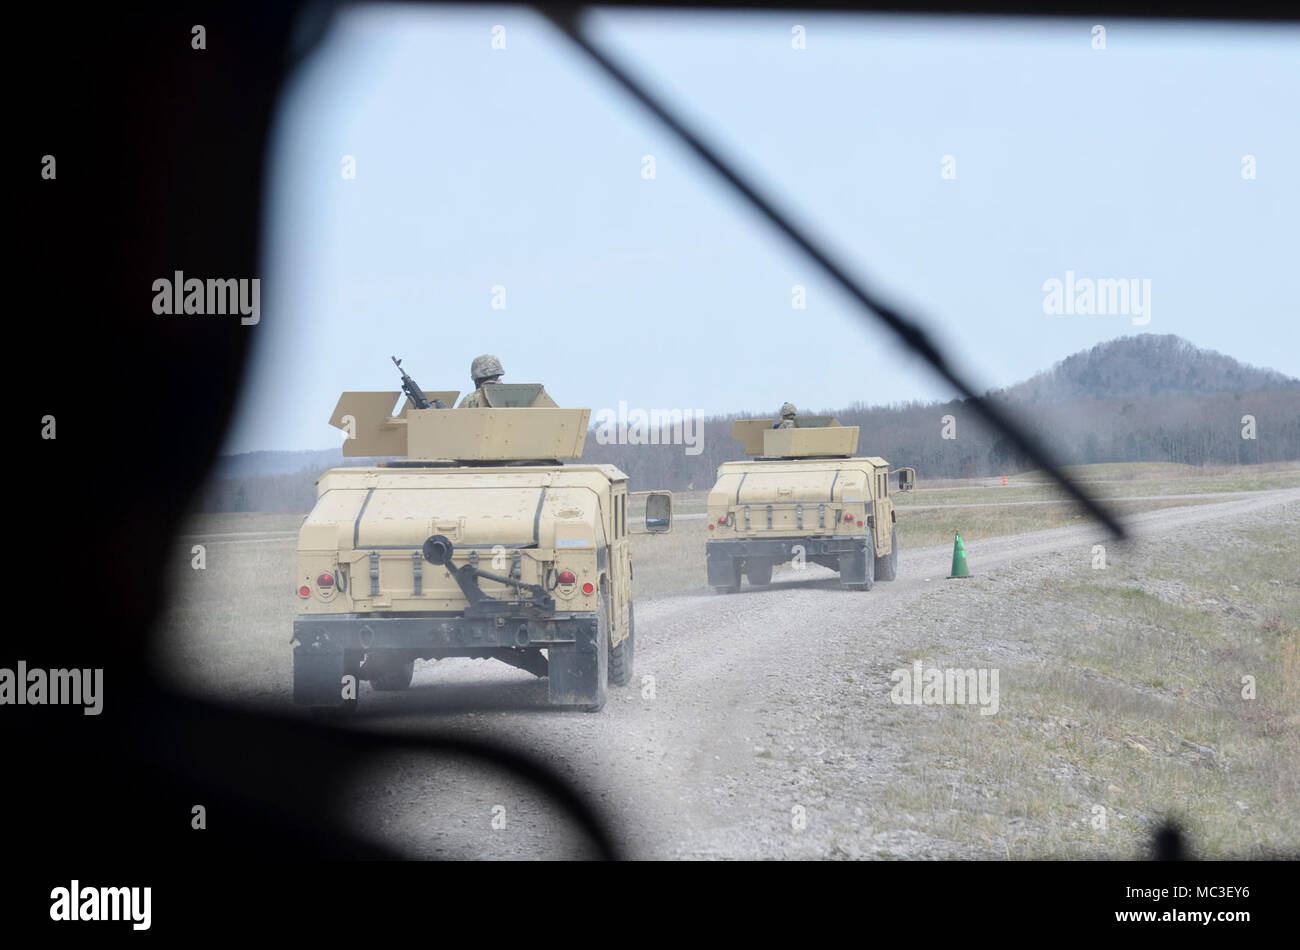 U.S. Army Reserve Soldiers move into engagement zones in convoy live-fire escort team qualification during Operation Cold Steel II hosted by the 377th Theater Sustainment Command at Ft. Knox, Ky., March 23, 2018. Operation Cold Steel is the U.S. Army Reserve’s crew-served weapons qualification and validation exercise to ensure America’s Army Reserve units and Soldiers are trained and ready to deploy on short-notice and bring combat-ready and lethal firepower in support of the Army and our joint partners anywhere in the world. Stock Photo